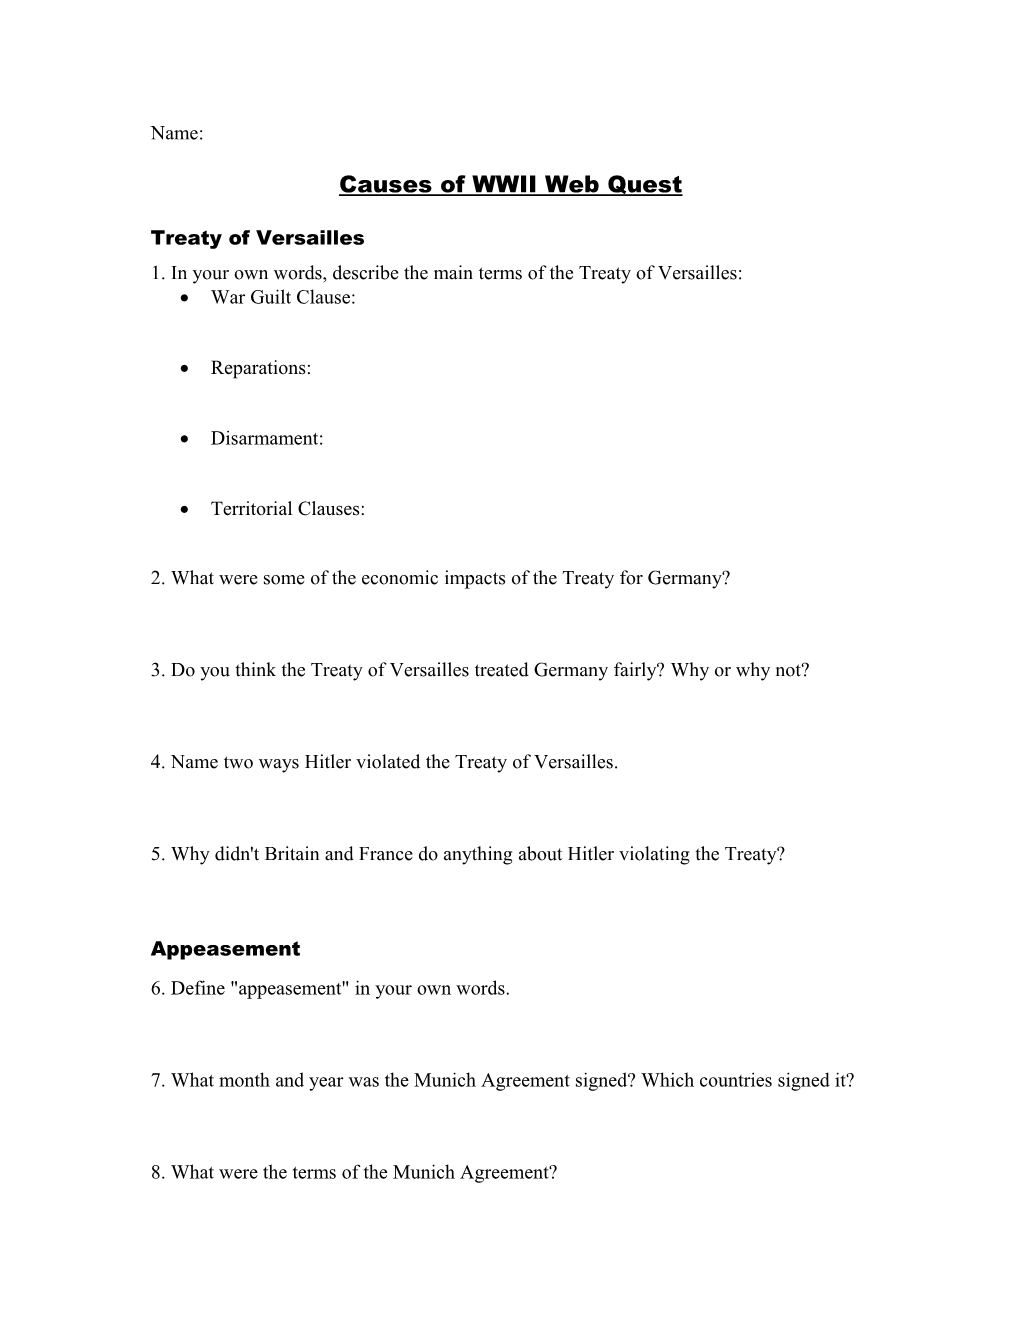 Causes of WWII Web Quest